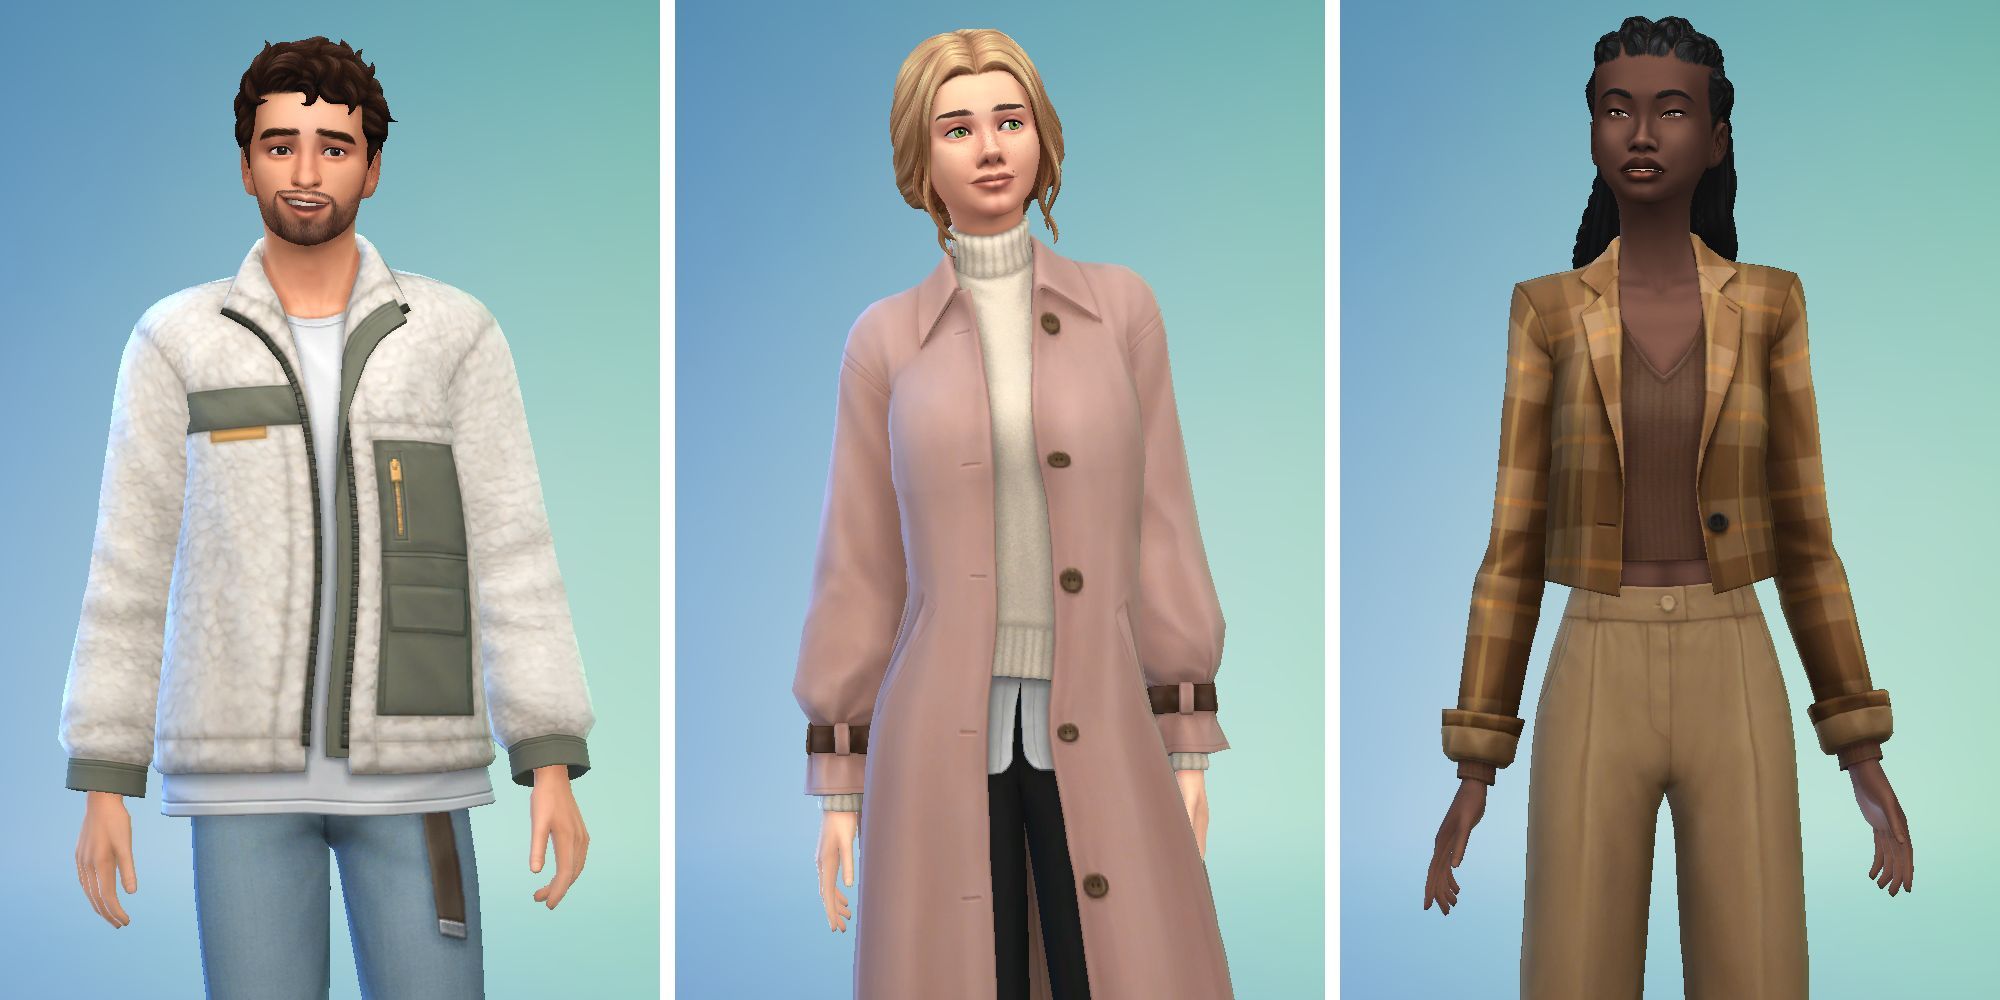 Three images of Sims from Sims 4 in Create A Sim. One in white coat, another in a pink coat, and a third in a brown plaid blazer